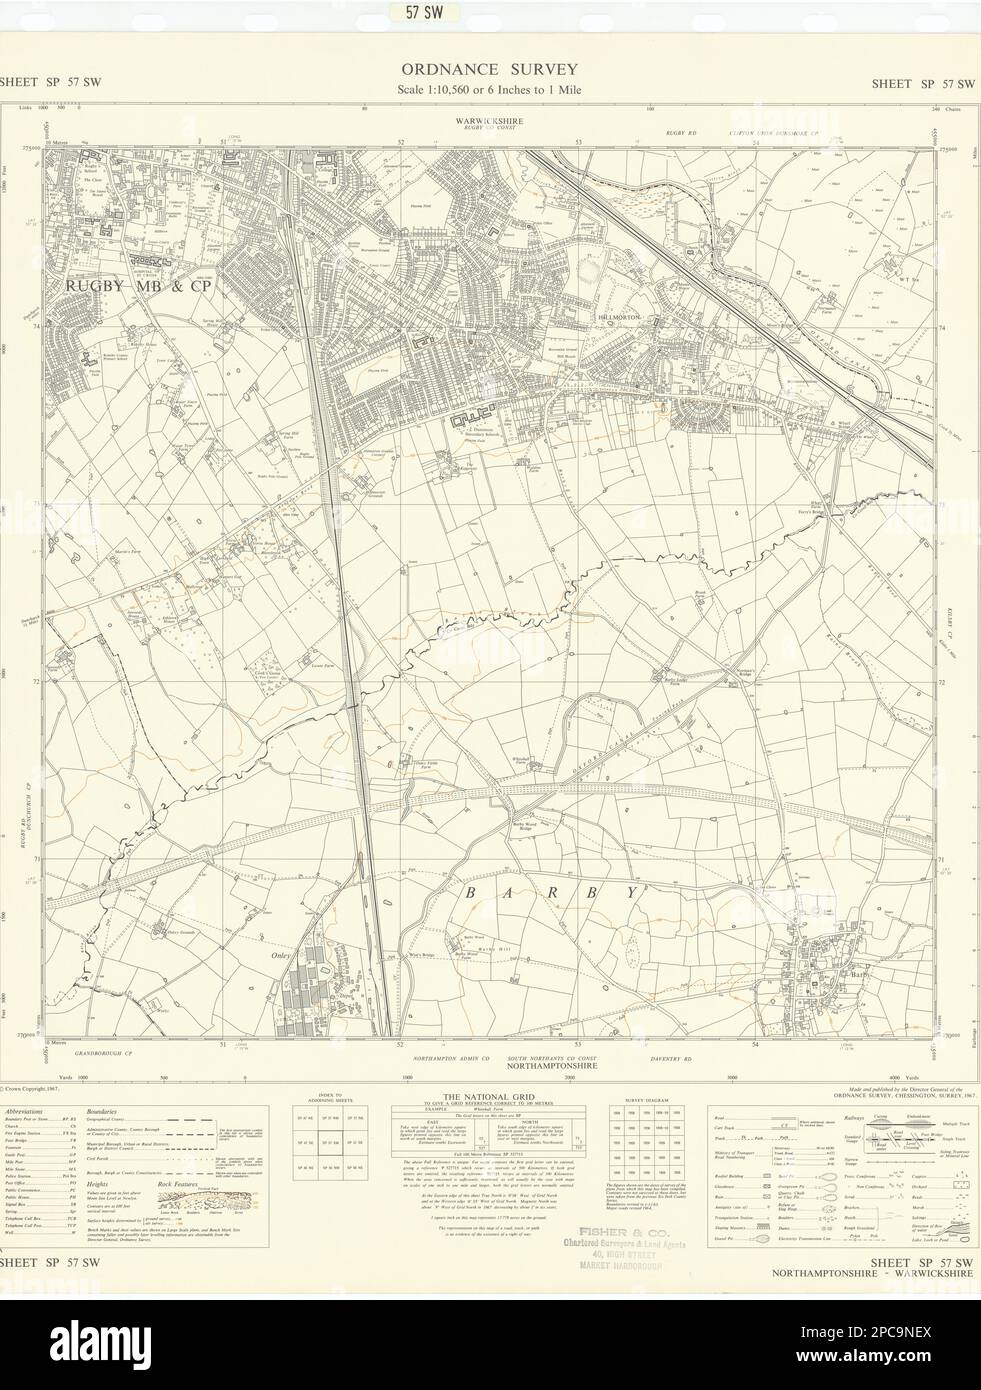 Ordnance Survey Sheet SP57SW Warwichshire Rugby Hillmorton Barby 1967 old map Stock Photo